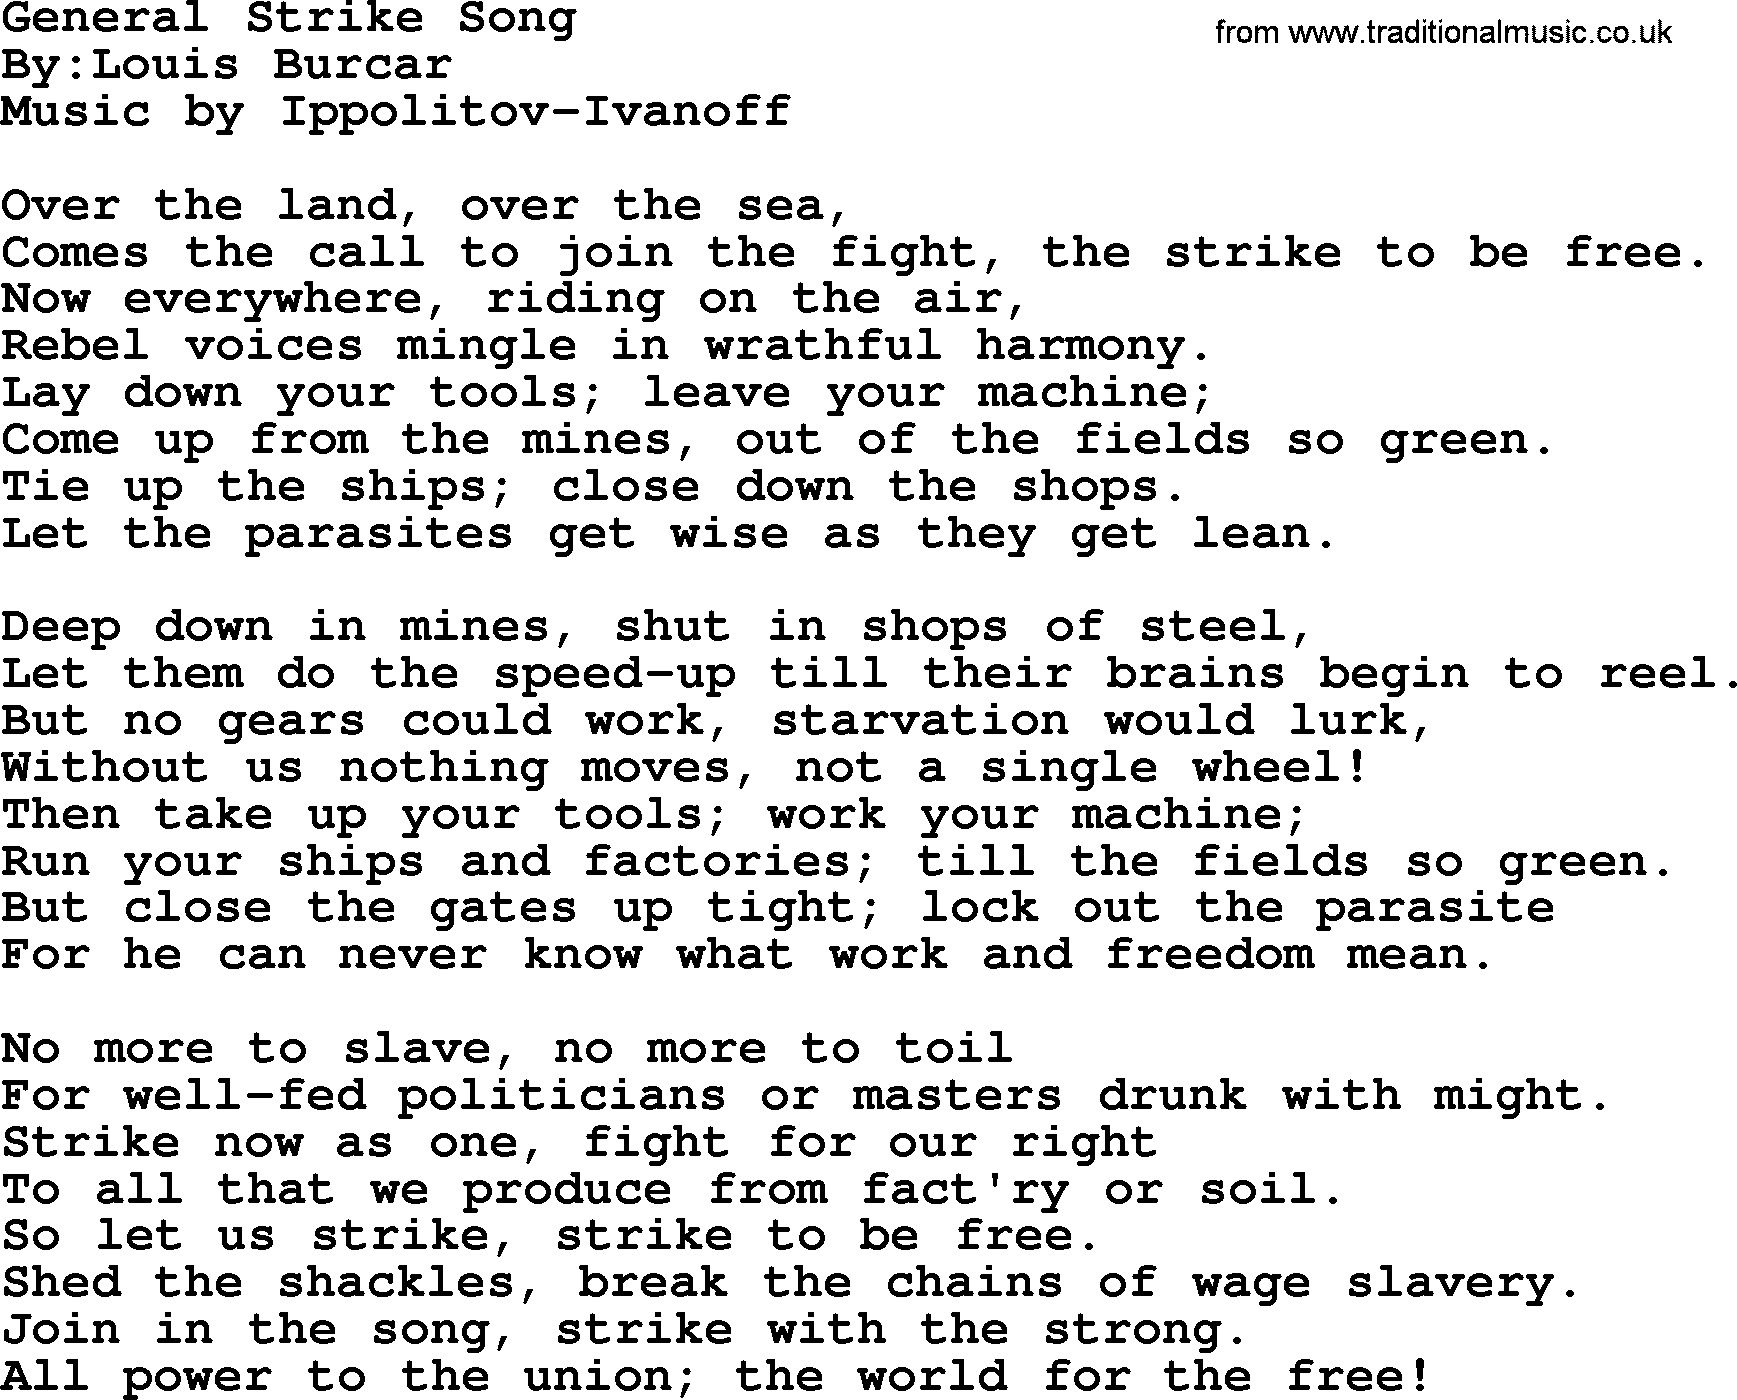 Political, Solidarity, Workers or Union song: General Strike Song, lyrics